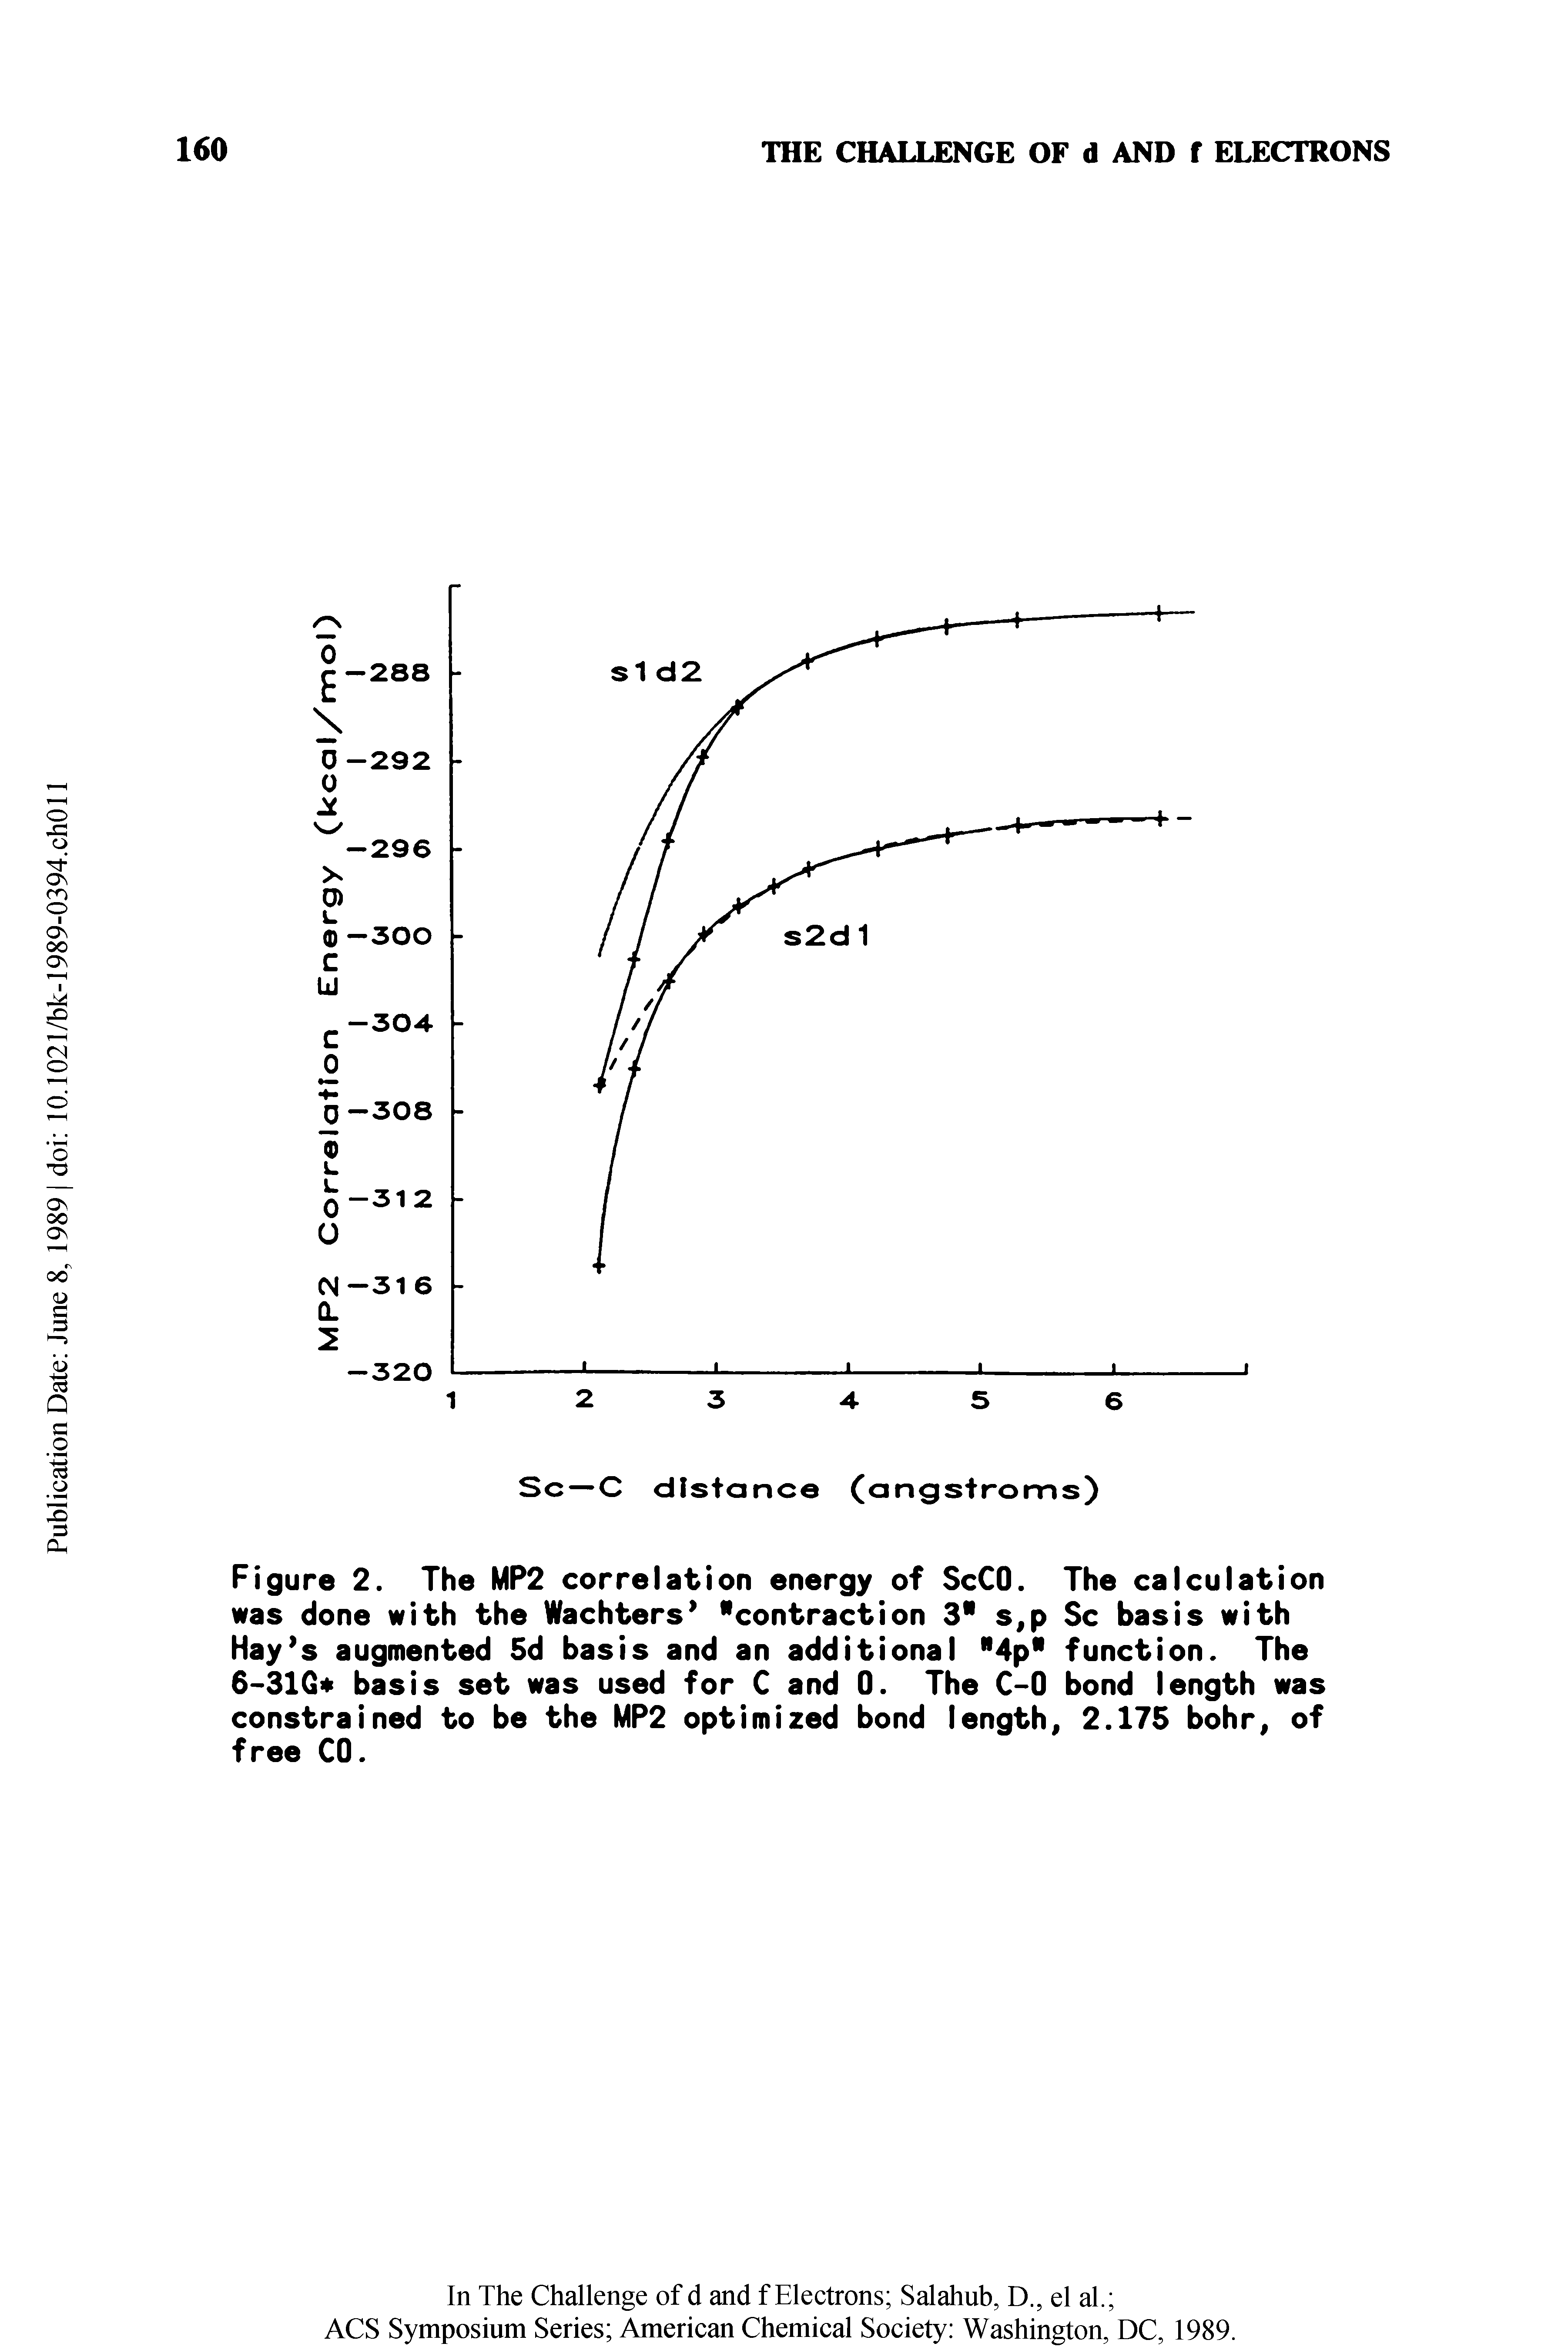 Figure 2. The MP2 correlation energy of ScCO. The calculation was done with the Wachters "contraction 3" s,p Sc basis with Hay s augmented 5d basis and an additional 4p" function. The 6-31C> basis set was used for C and 0. The C-0 bond length was constrained to be the MP2 optimized bond length, 2.175 bohr, of free CO.